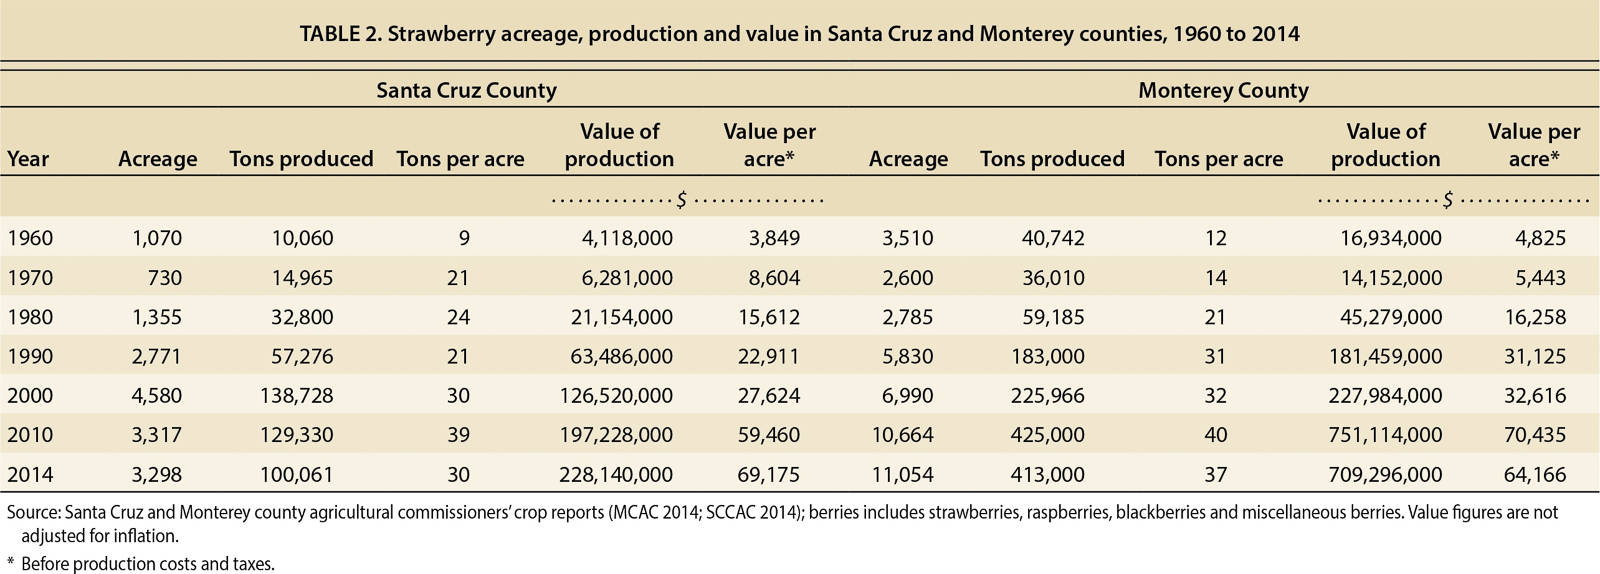 Strawberry acreage, production and value in Santa Cruz and Monterey counties, 1960 to 2014